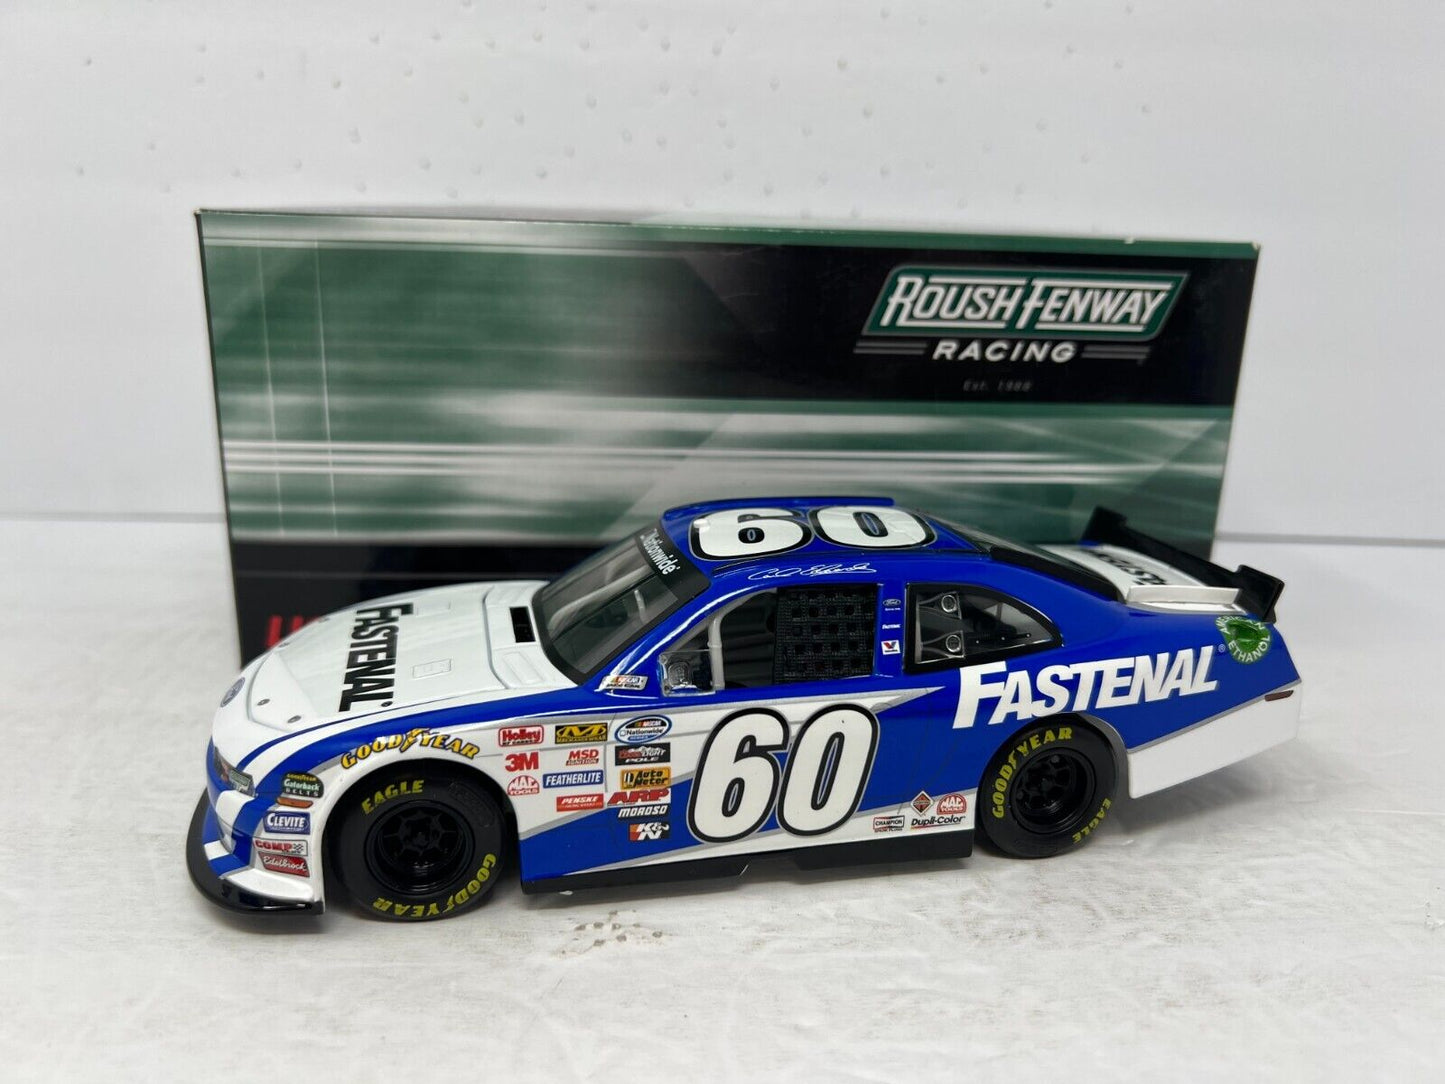 Lionel Racing Nascar #60 Carl Edwards Fastenal 2011 Ford Mustang 1:24 Diecast